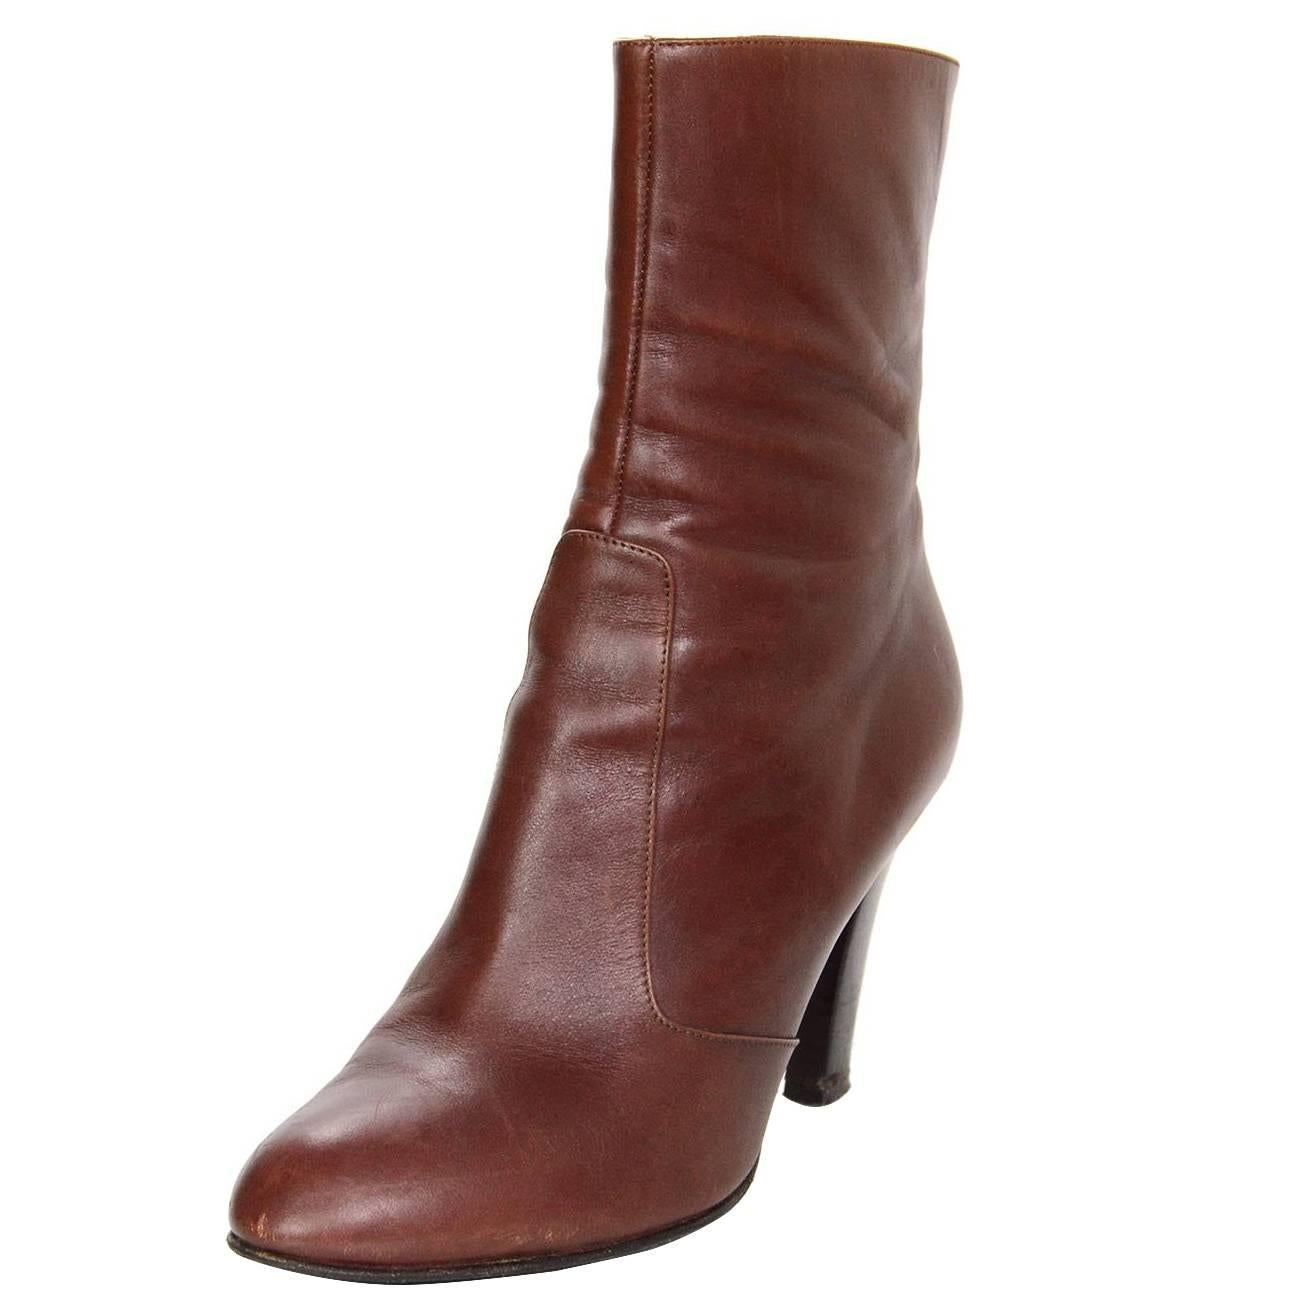 Sergio Rossi Brown Leather Ankle Boots sz 37.5 rt. $675